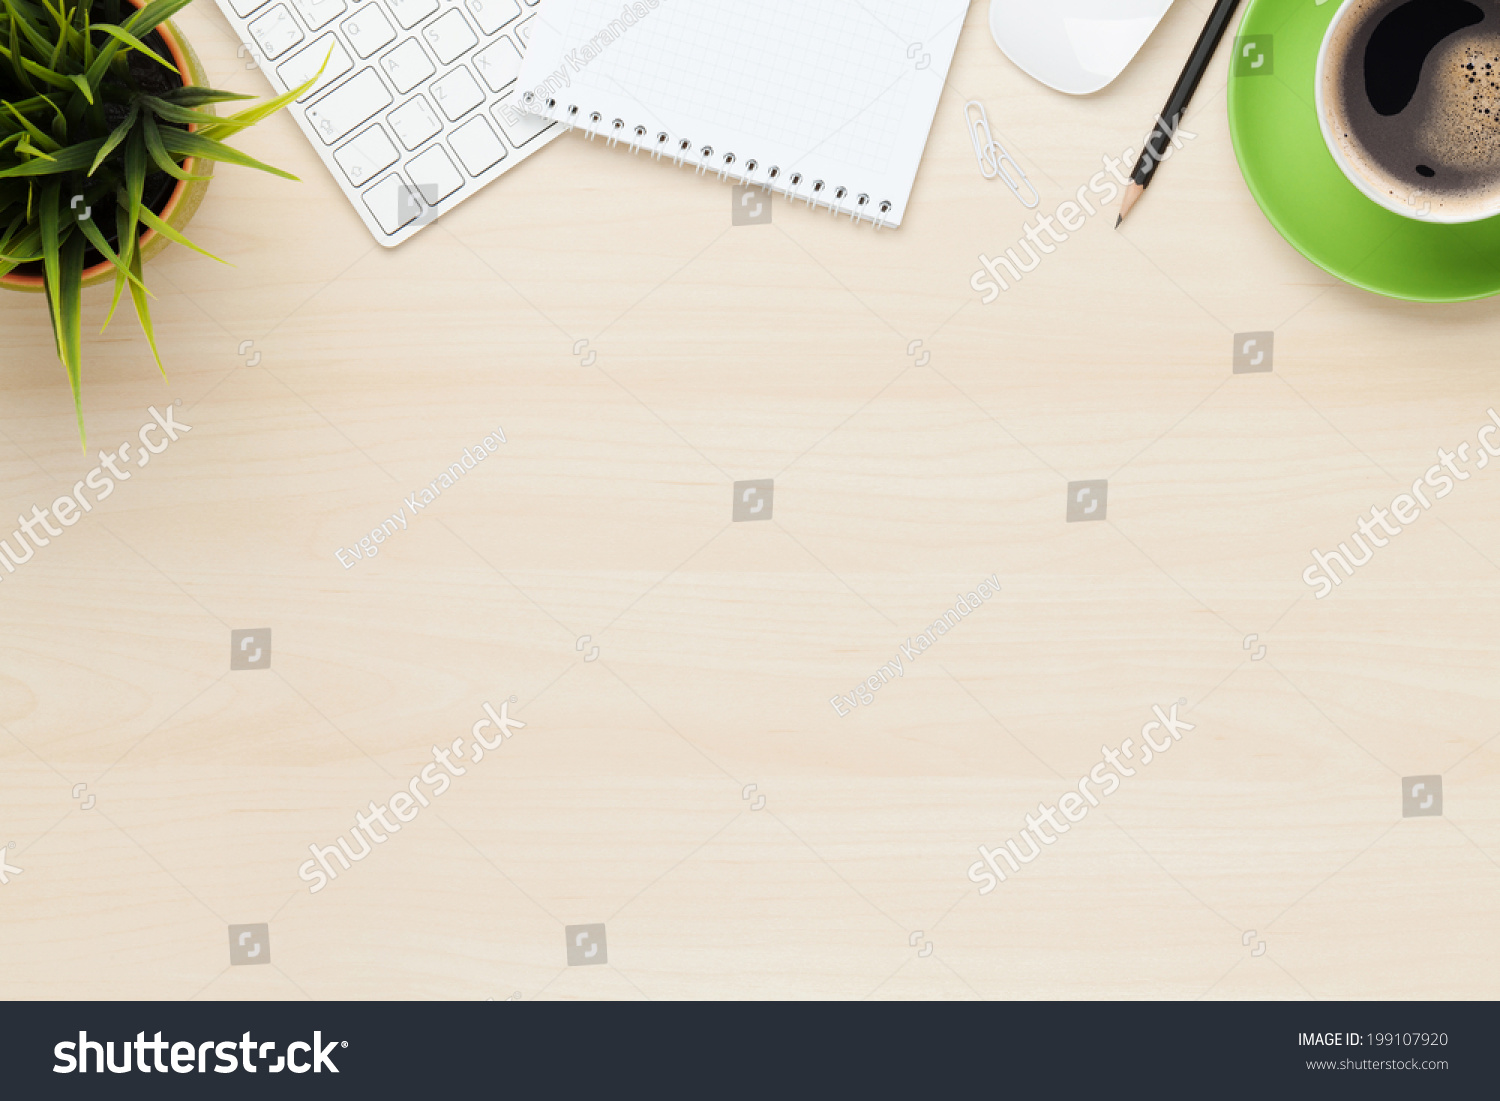 Office table with notepad, computer and coffee cup. View from above with copy space #199107920